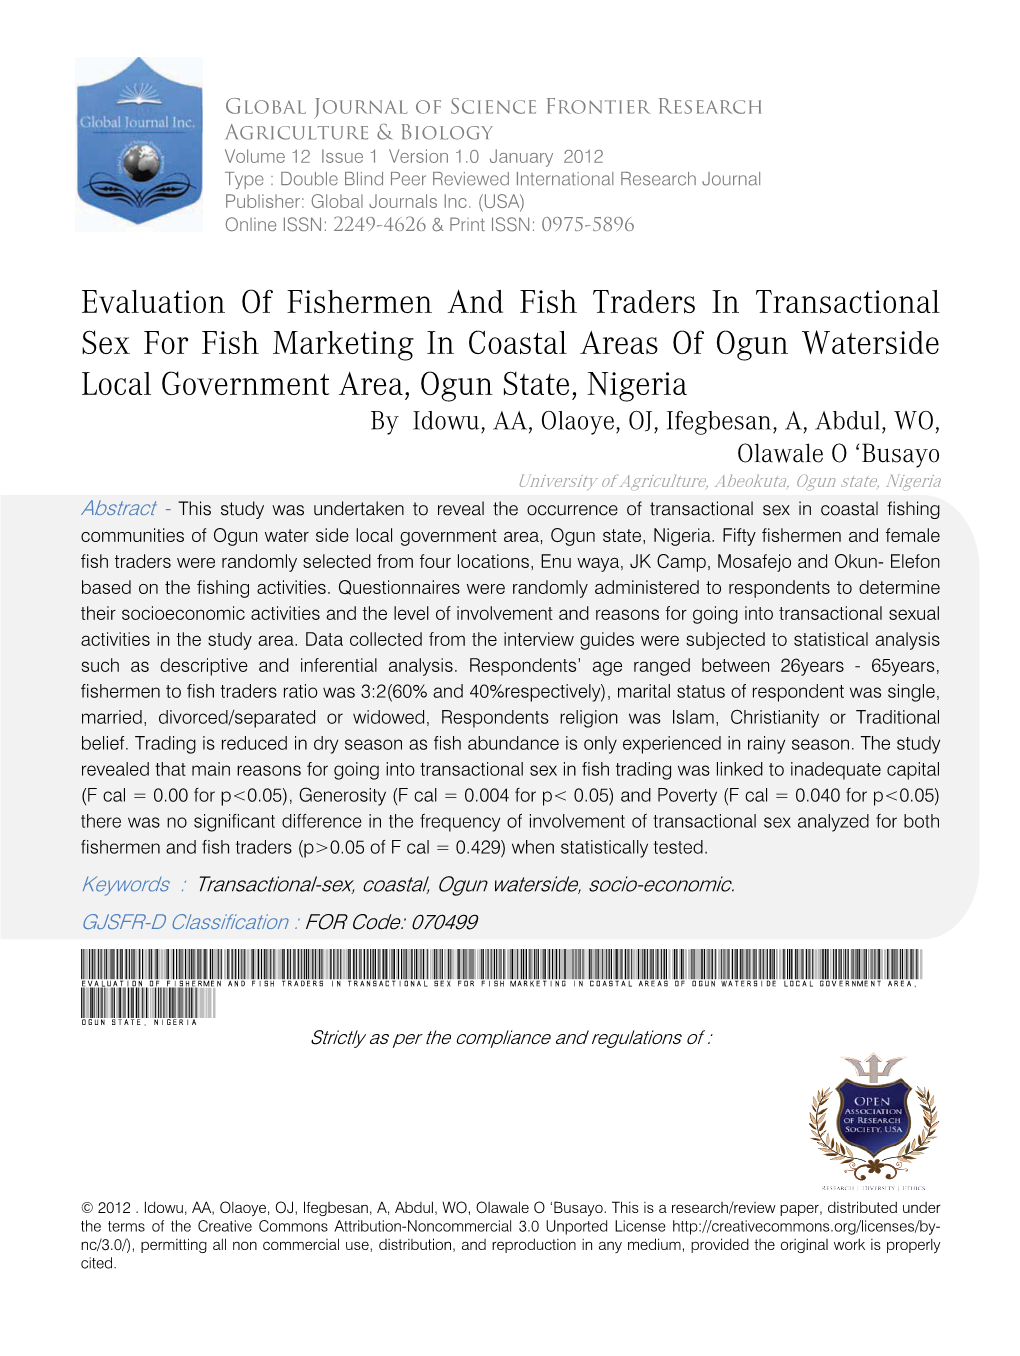 Evaluation of Fishermen and Fish Traders in Transactional Sex For